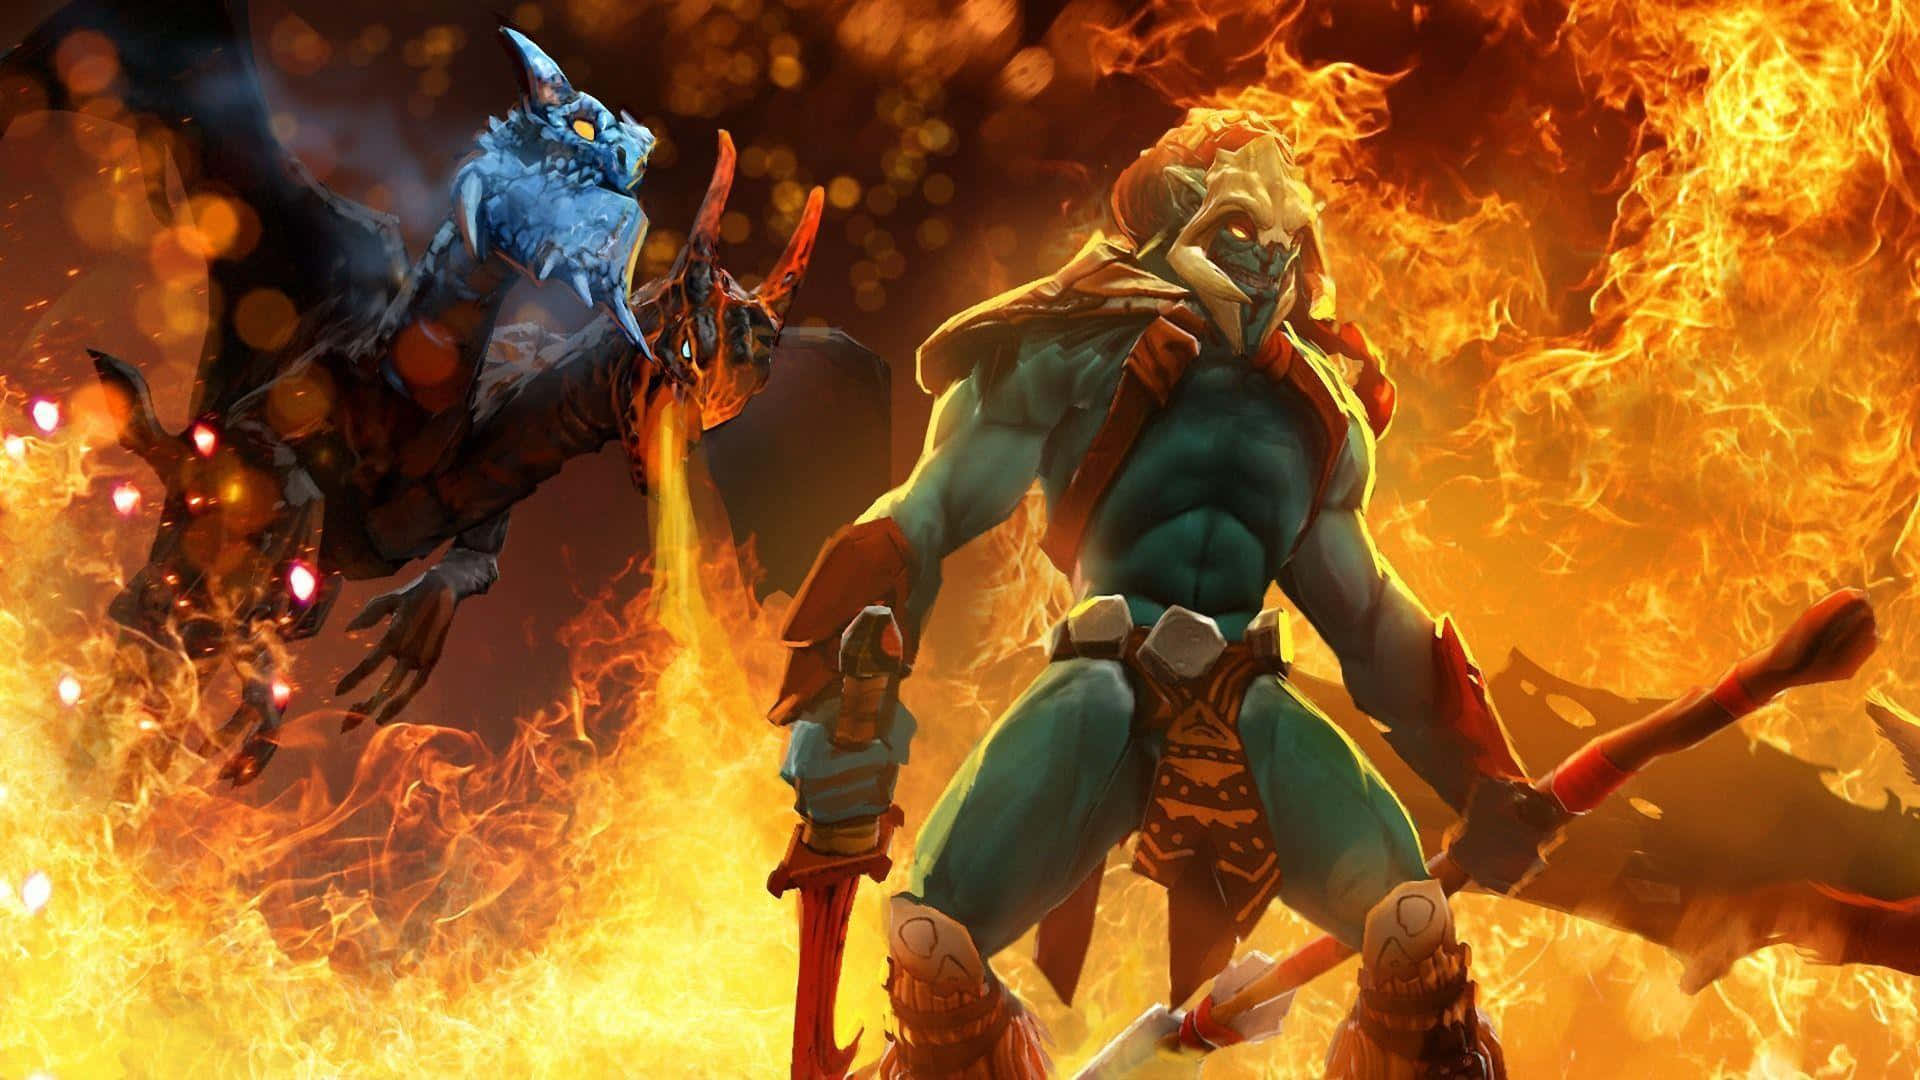 The vibrant and immersive world of Dota 2 on display